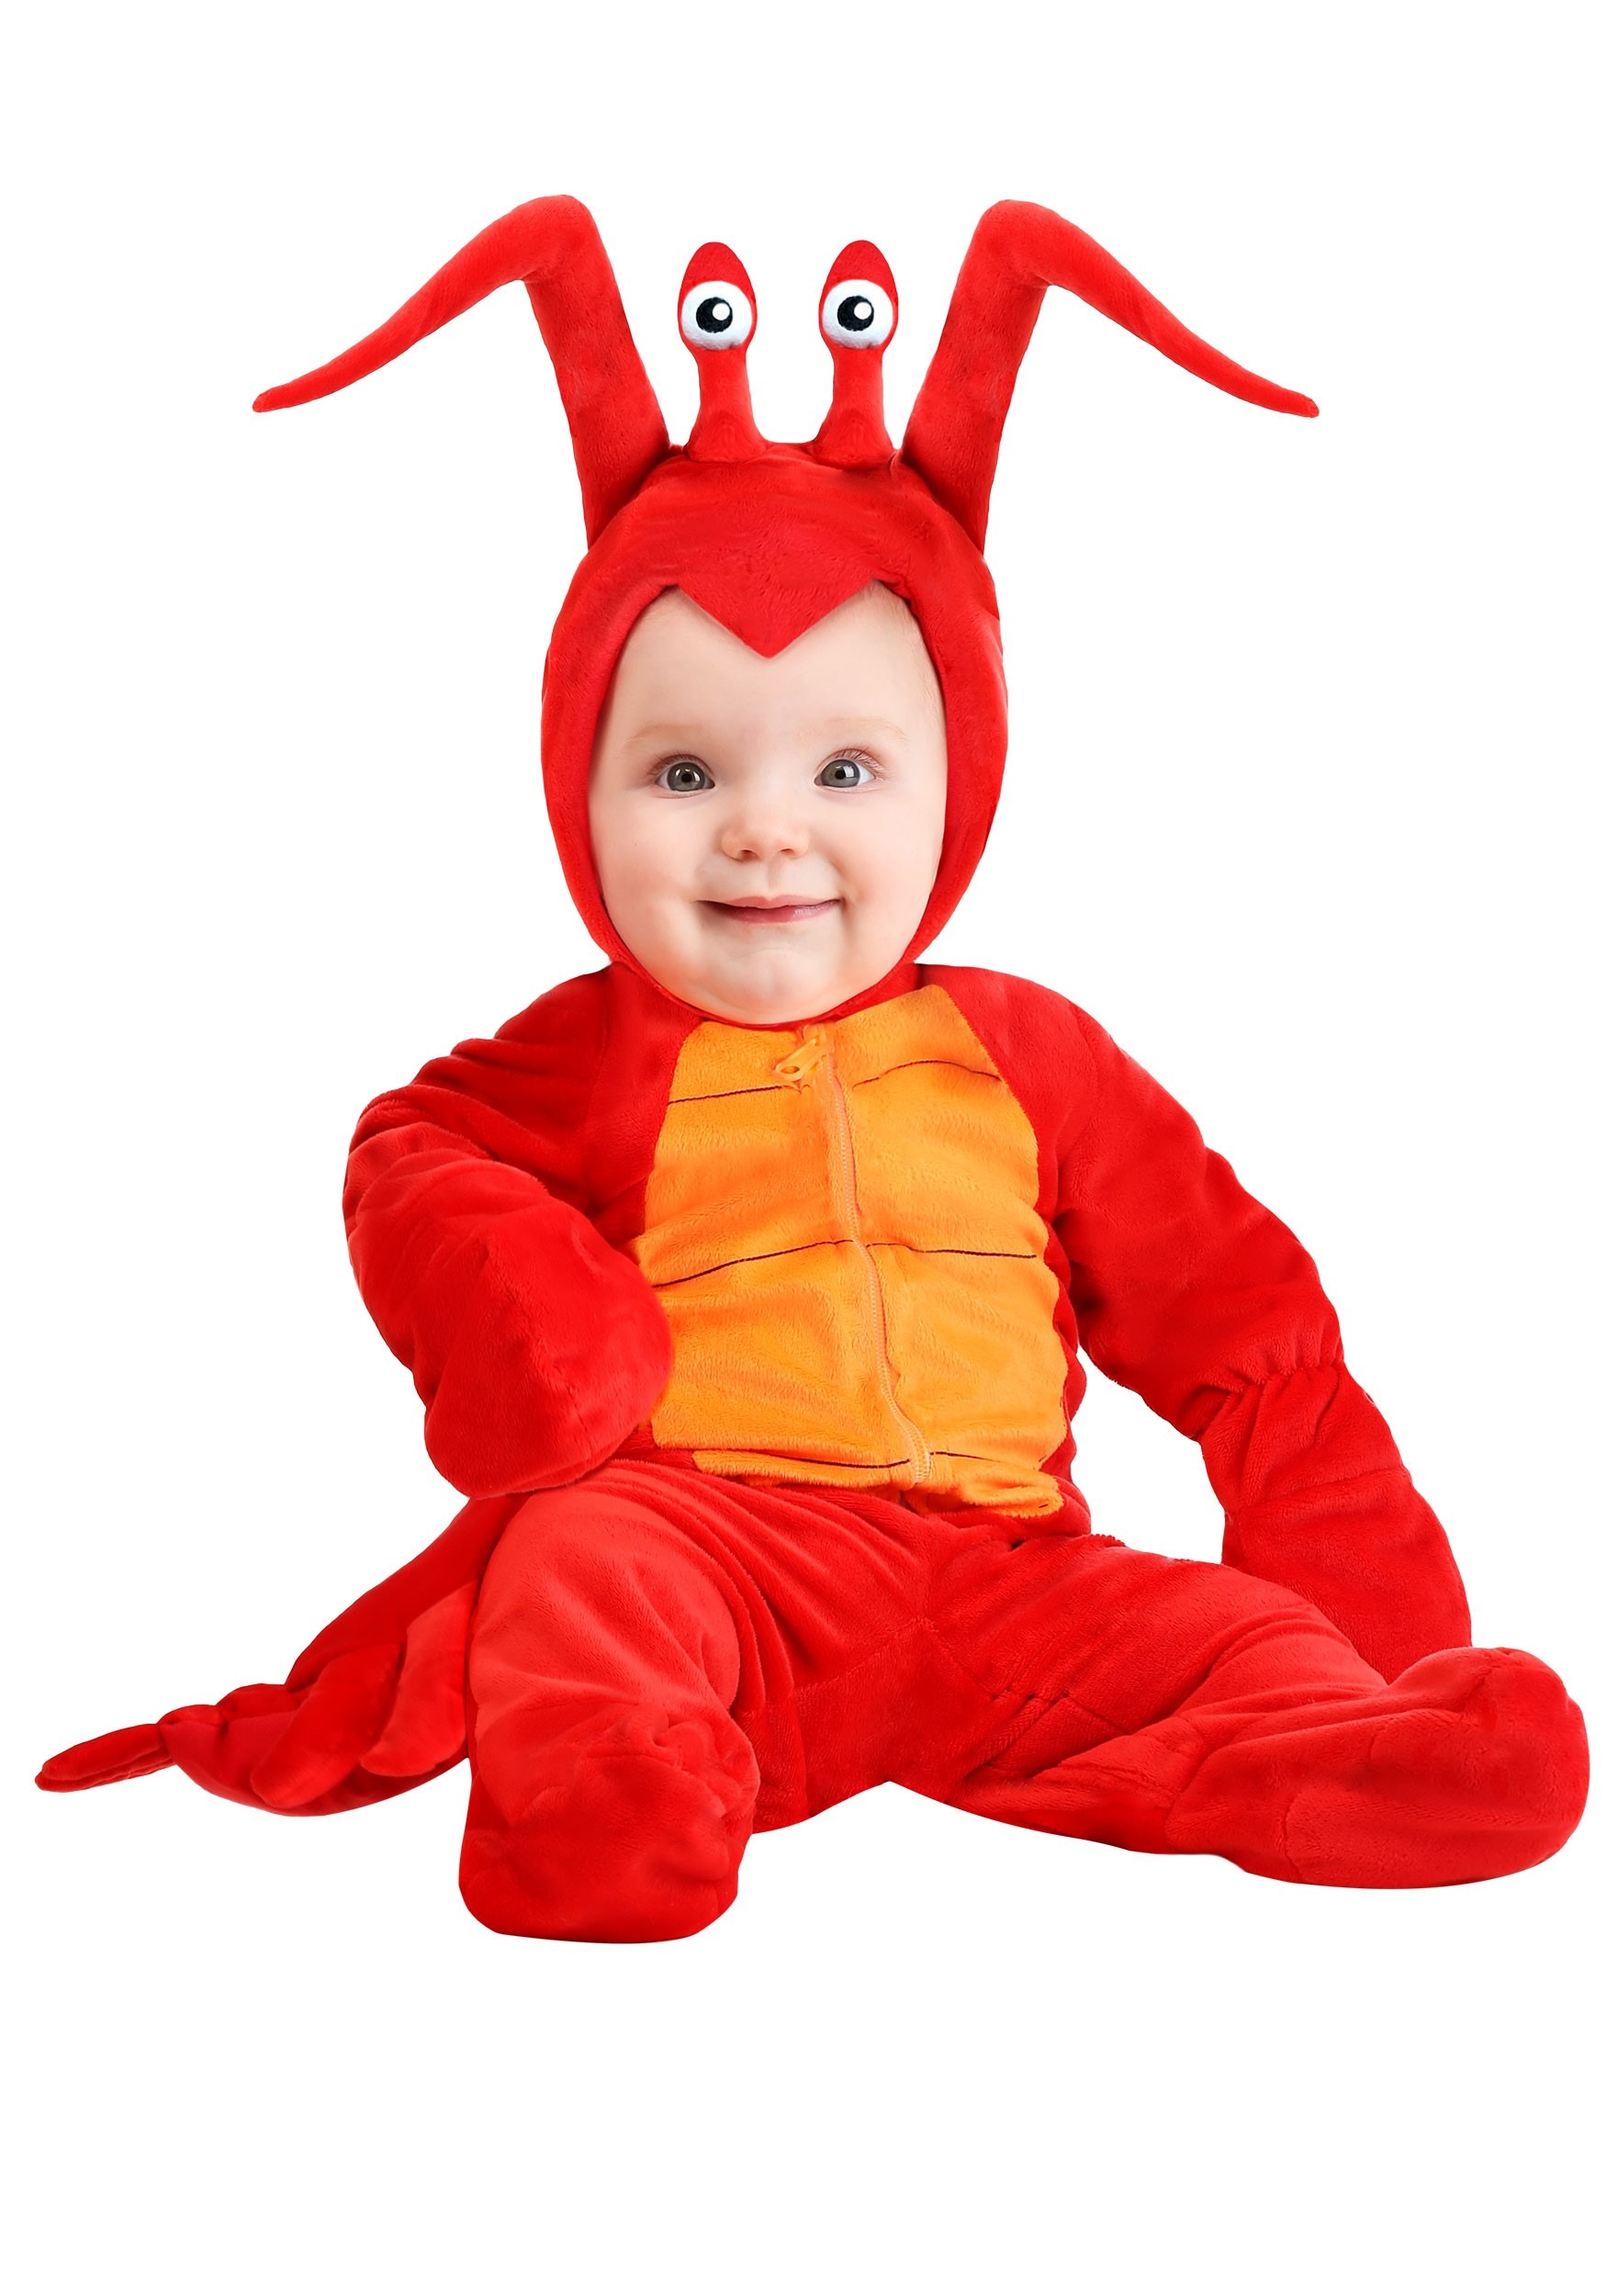 Photos - Fancy Dress ROCK FUN Costumes  Lobster Costume for Infants Orange/Red 